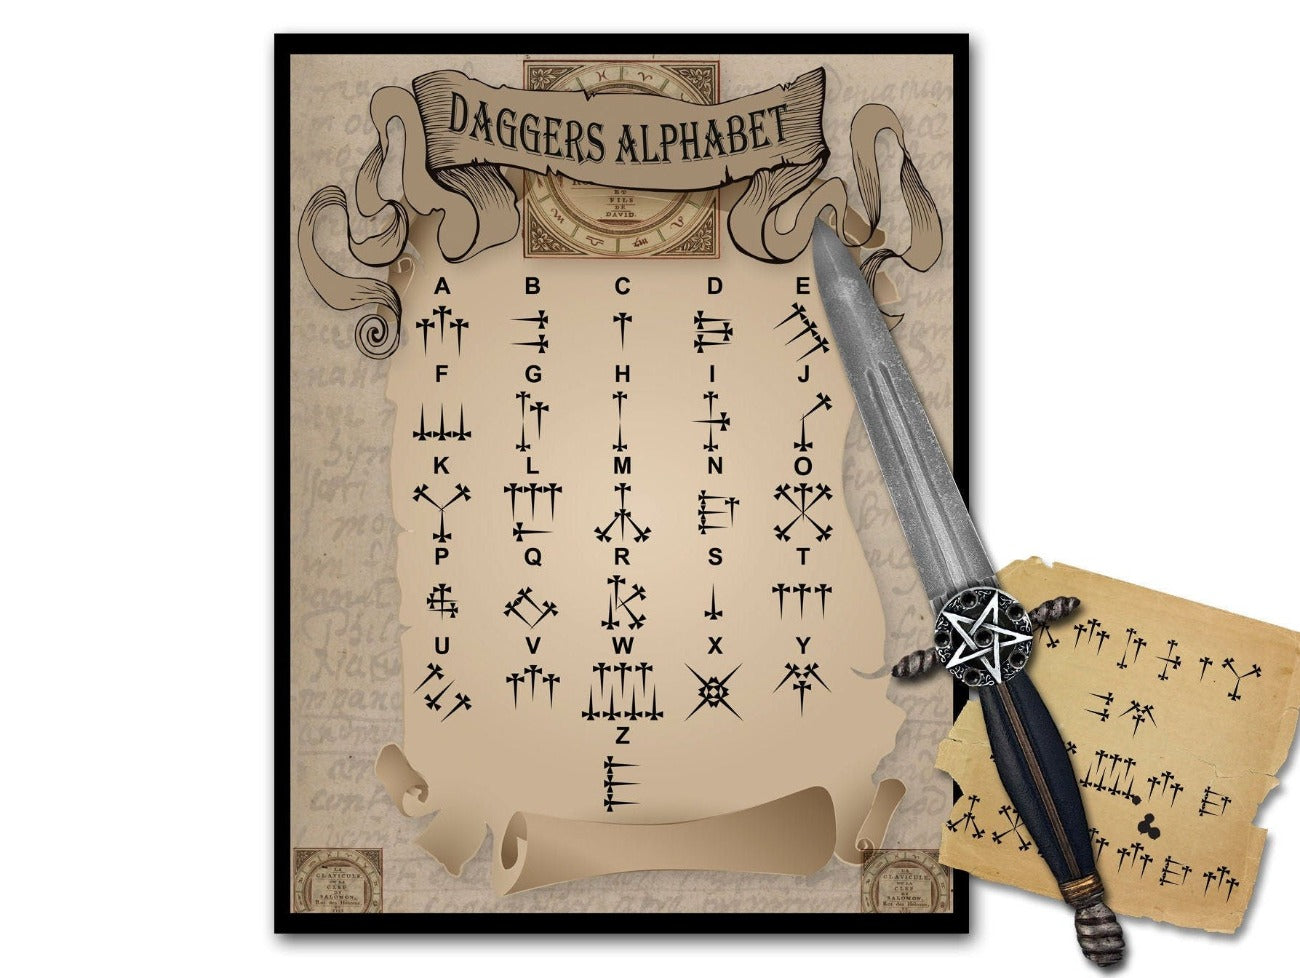 DAGGERS ALPHABET, Witchcraft Magical Secret Script, For Writing Spells and Rituals, Printable Spellbook Page - Morgana Magick Spell